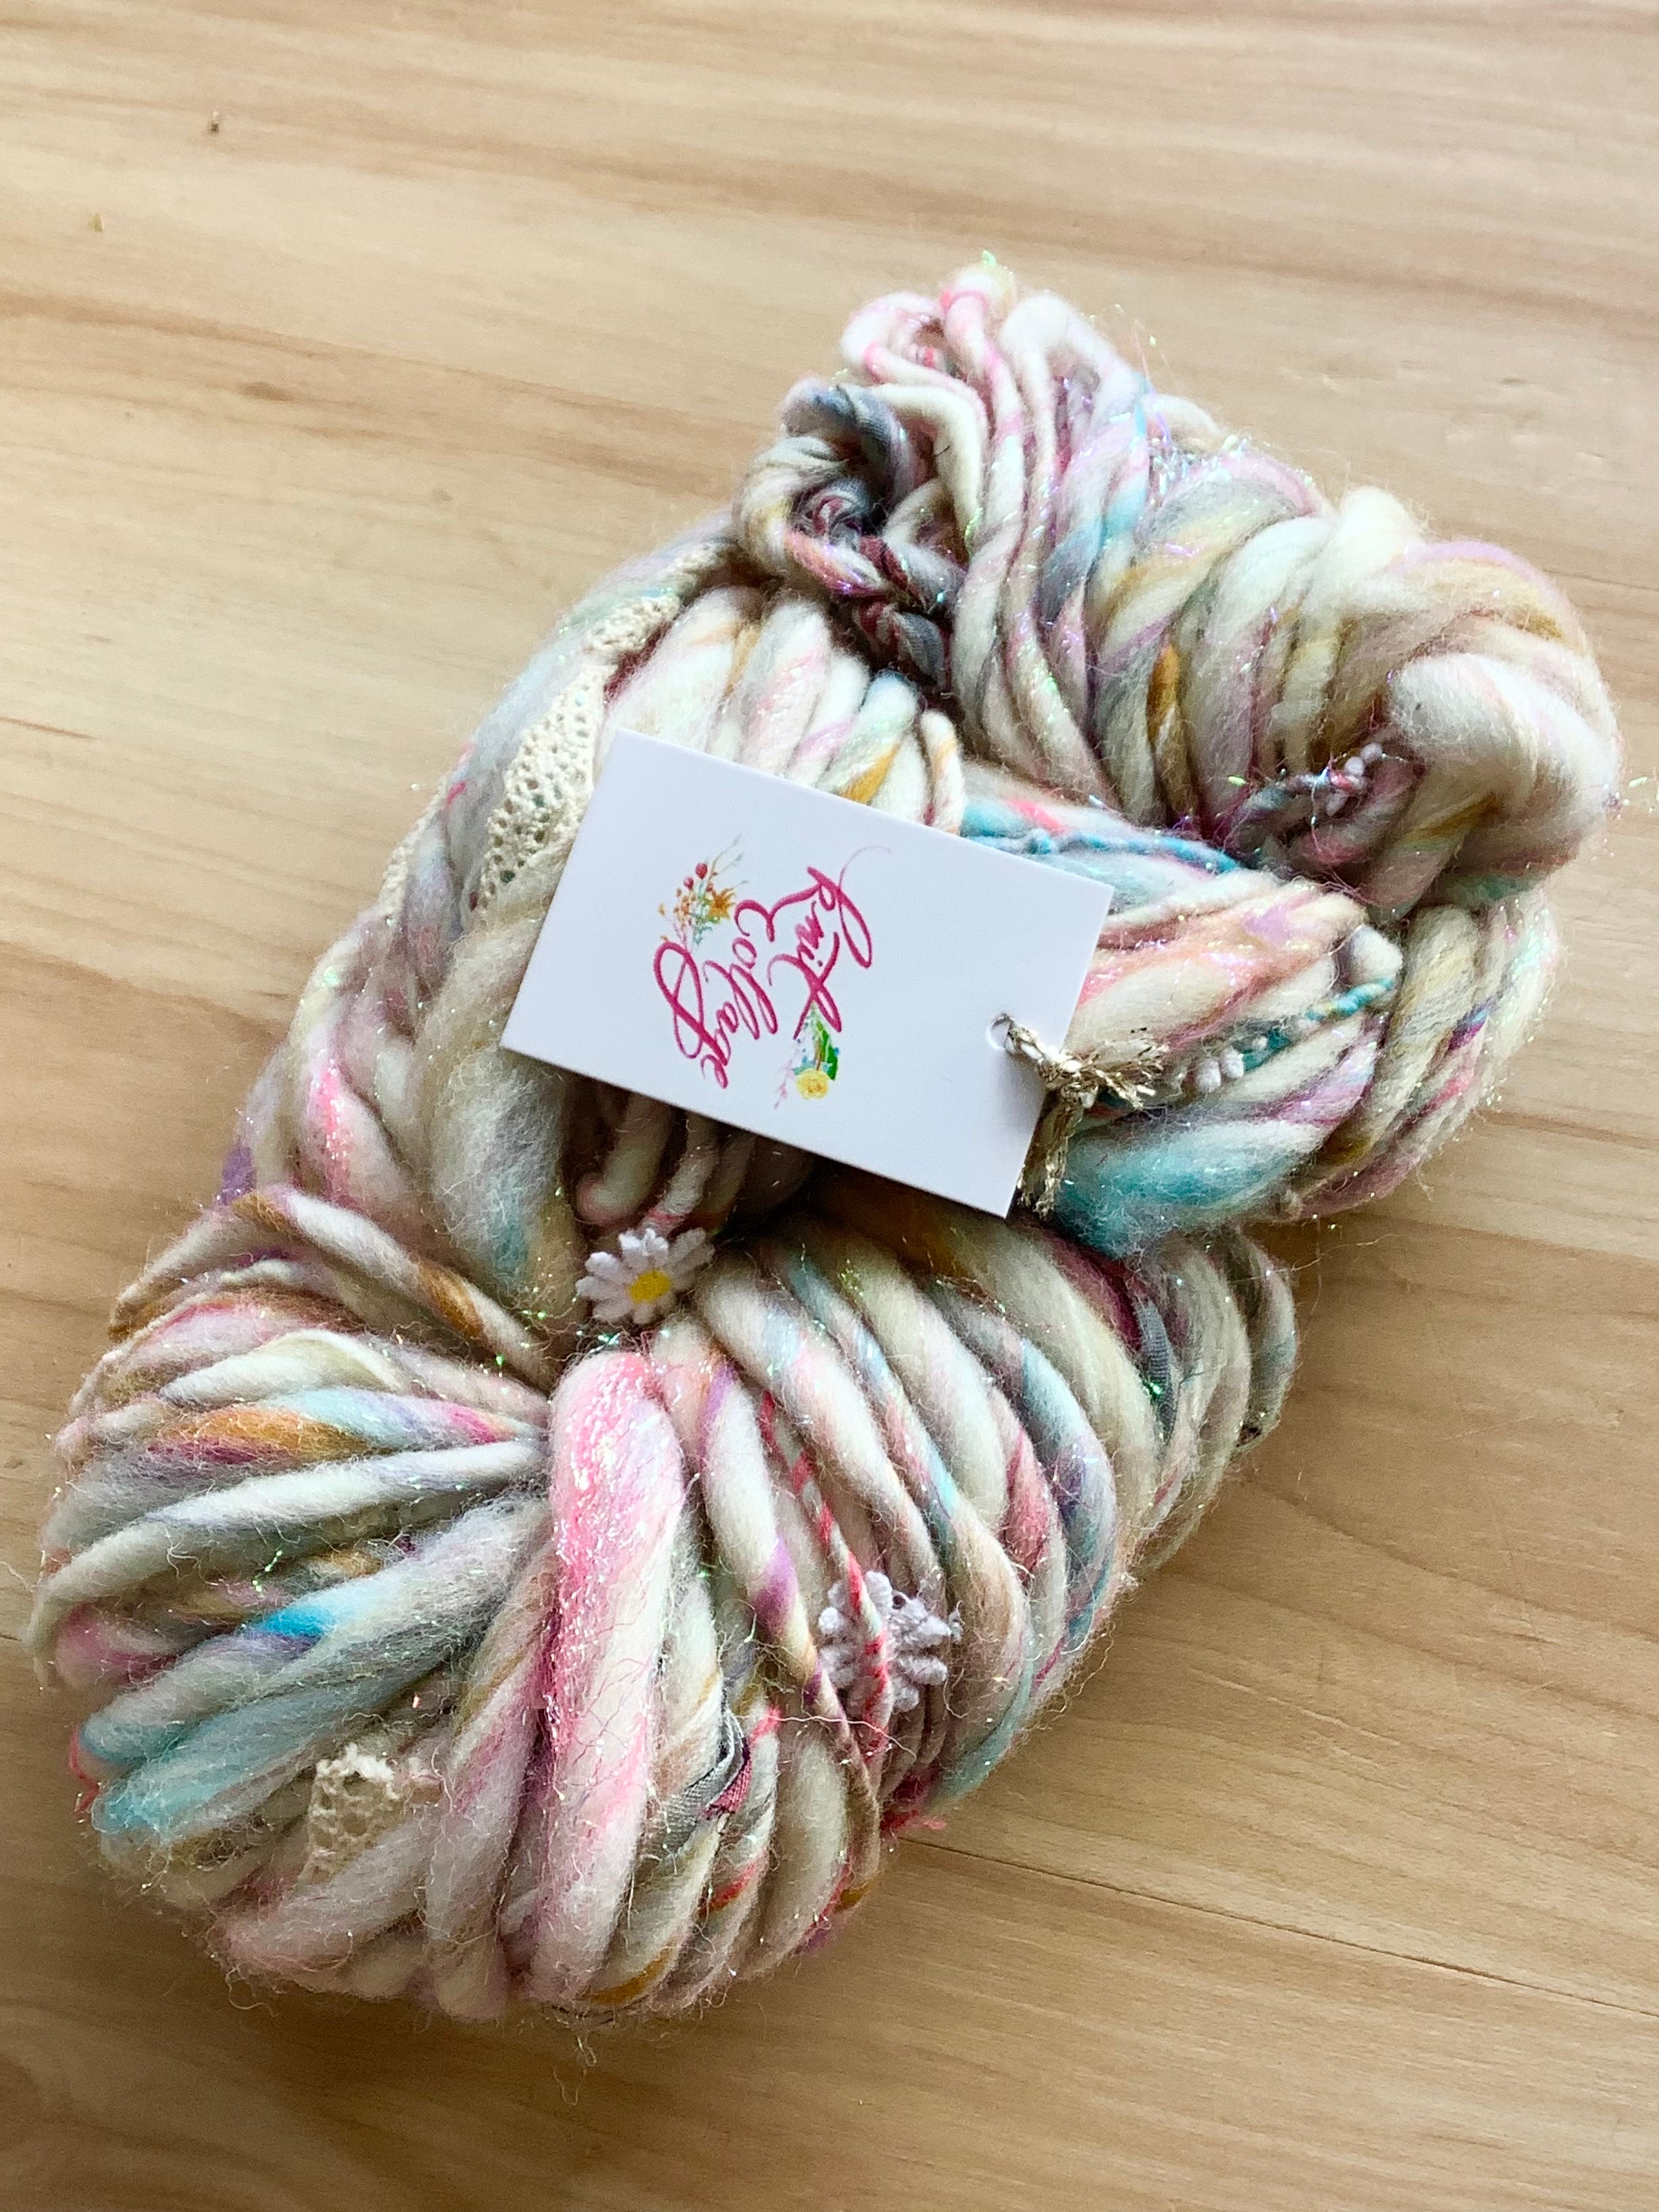 Grand Prismatic - Daisy Chain yarn from Knit Collage